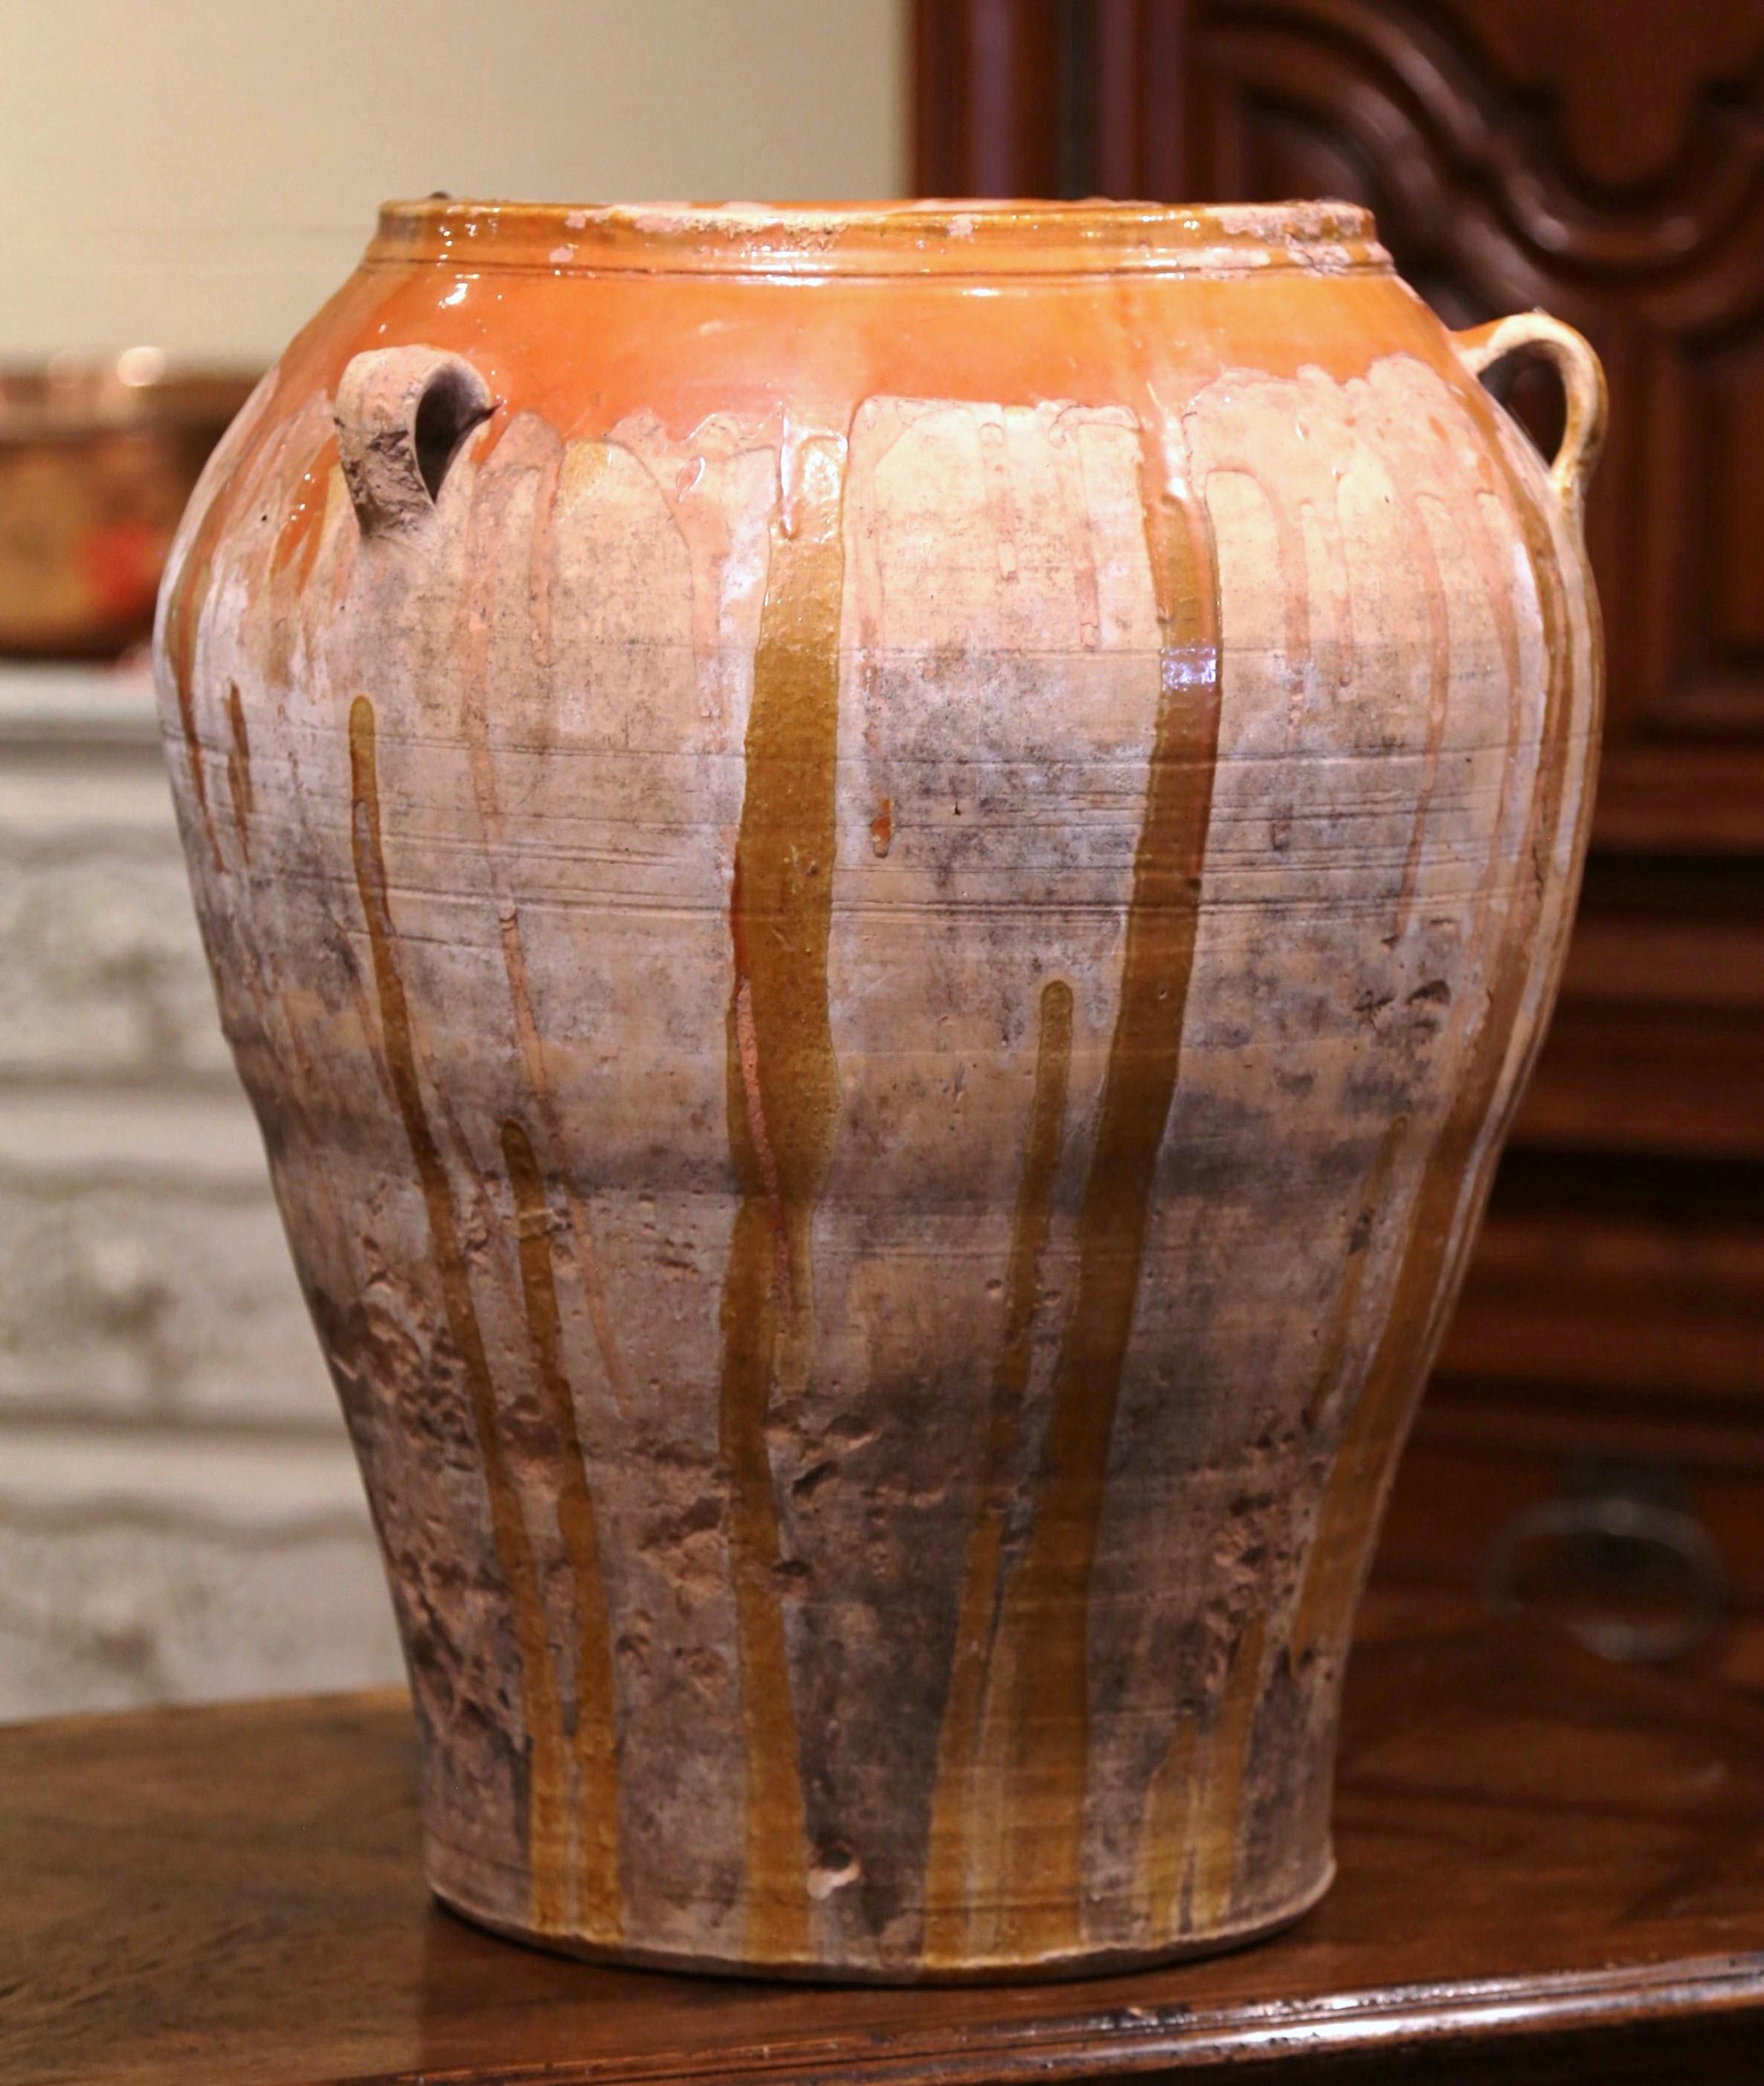 This large, antique earthenware jar was created in Southern France, circa 1870. Made of blond clay, the terracotta pot is round in shape with a tapered base and features with three handles at the top; the olive jar is embellished with a light brown